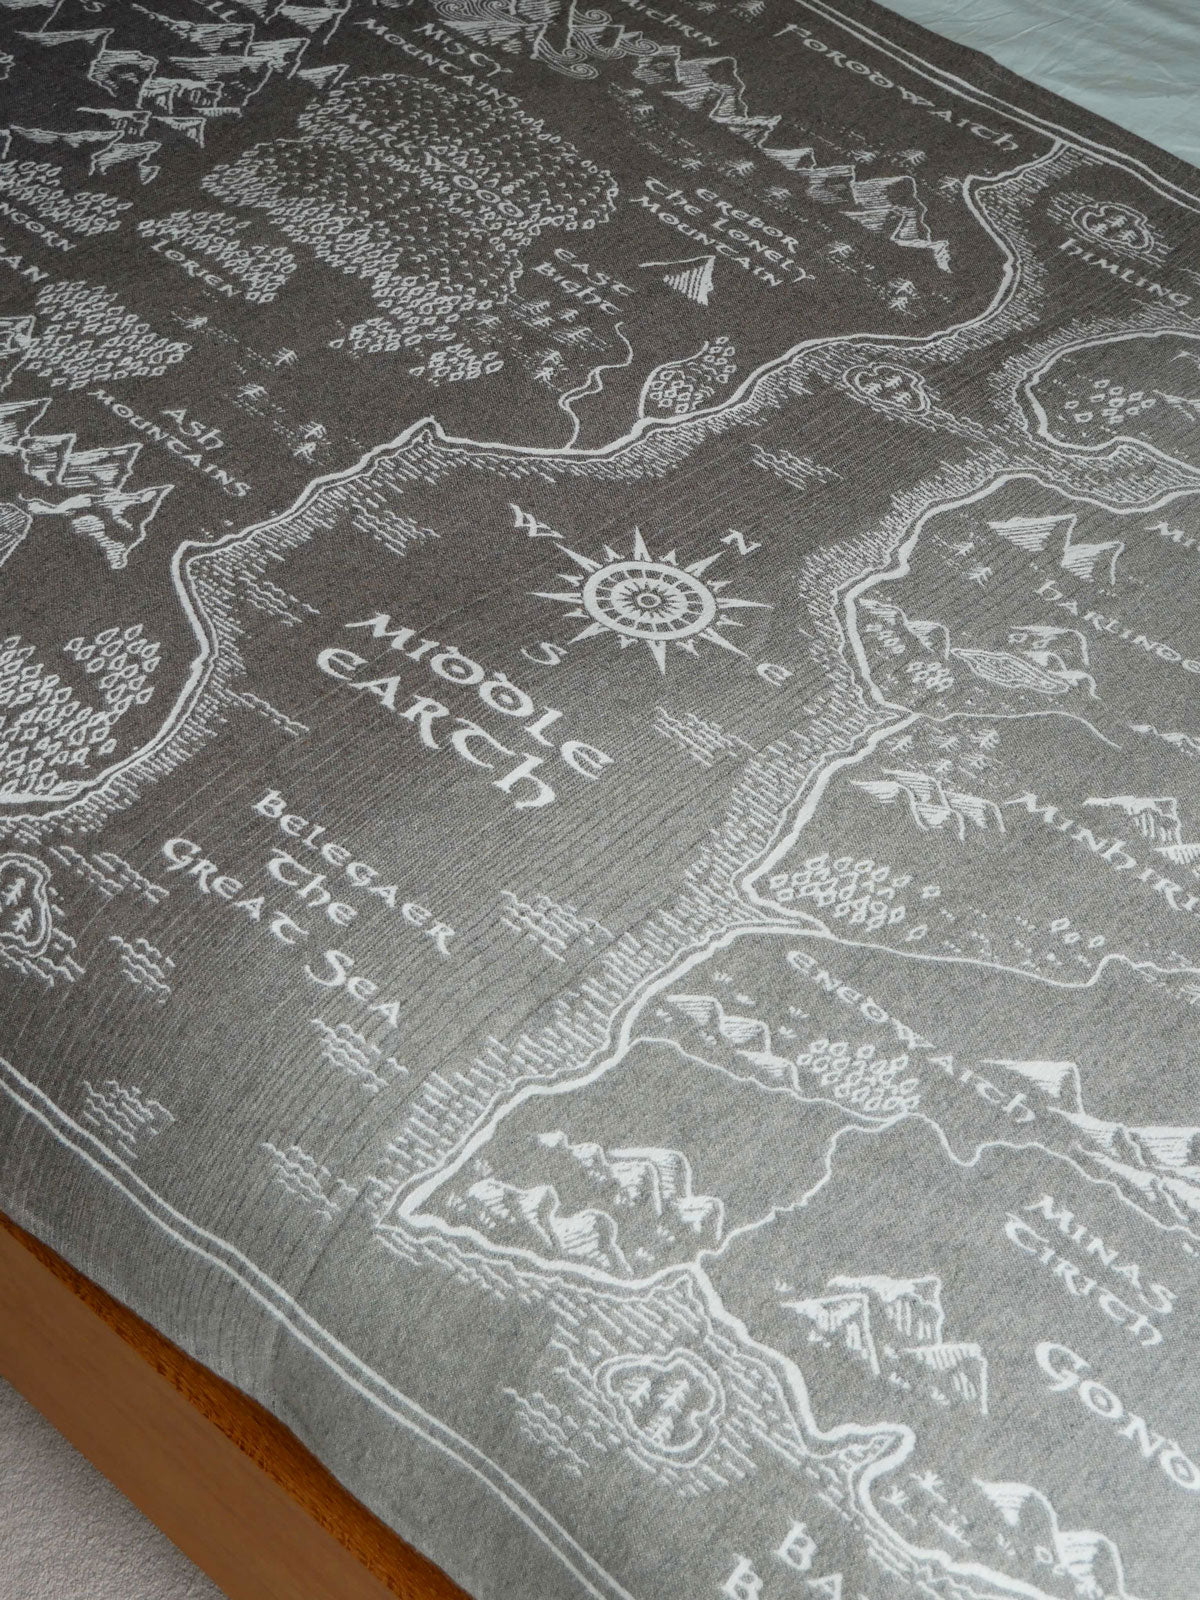 Middle Earth Map Blanket, Middle Earth Carpet, Middle Earth Fleece